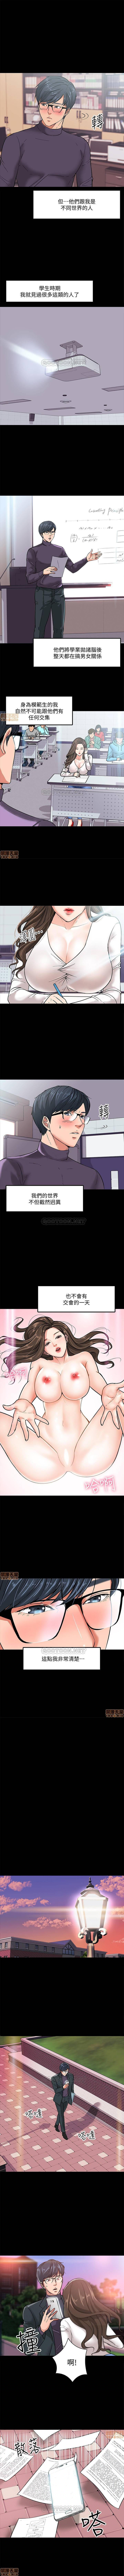 Pareja PROFESSOR, ARE YOU JUST GOING TO LOOK AT ME? | DESIRE SWAMP | 教授，你還等什麼? Ch. 2 [Chinese] Manhwa Roundass - Page 6